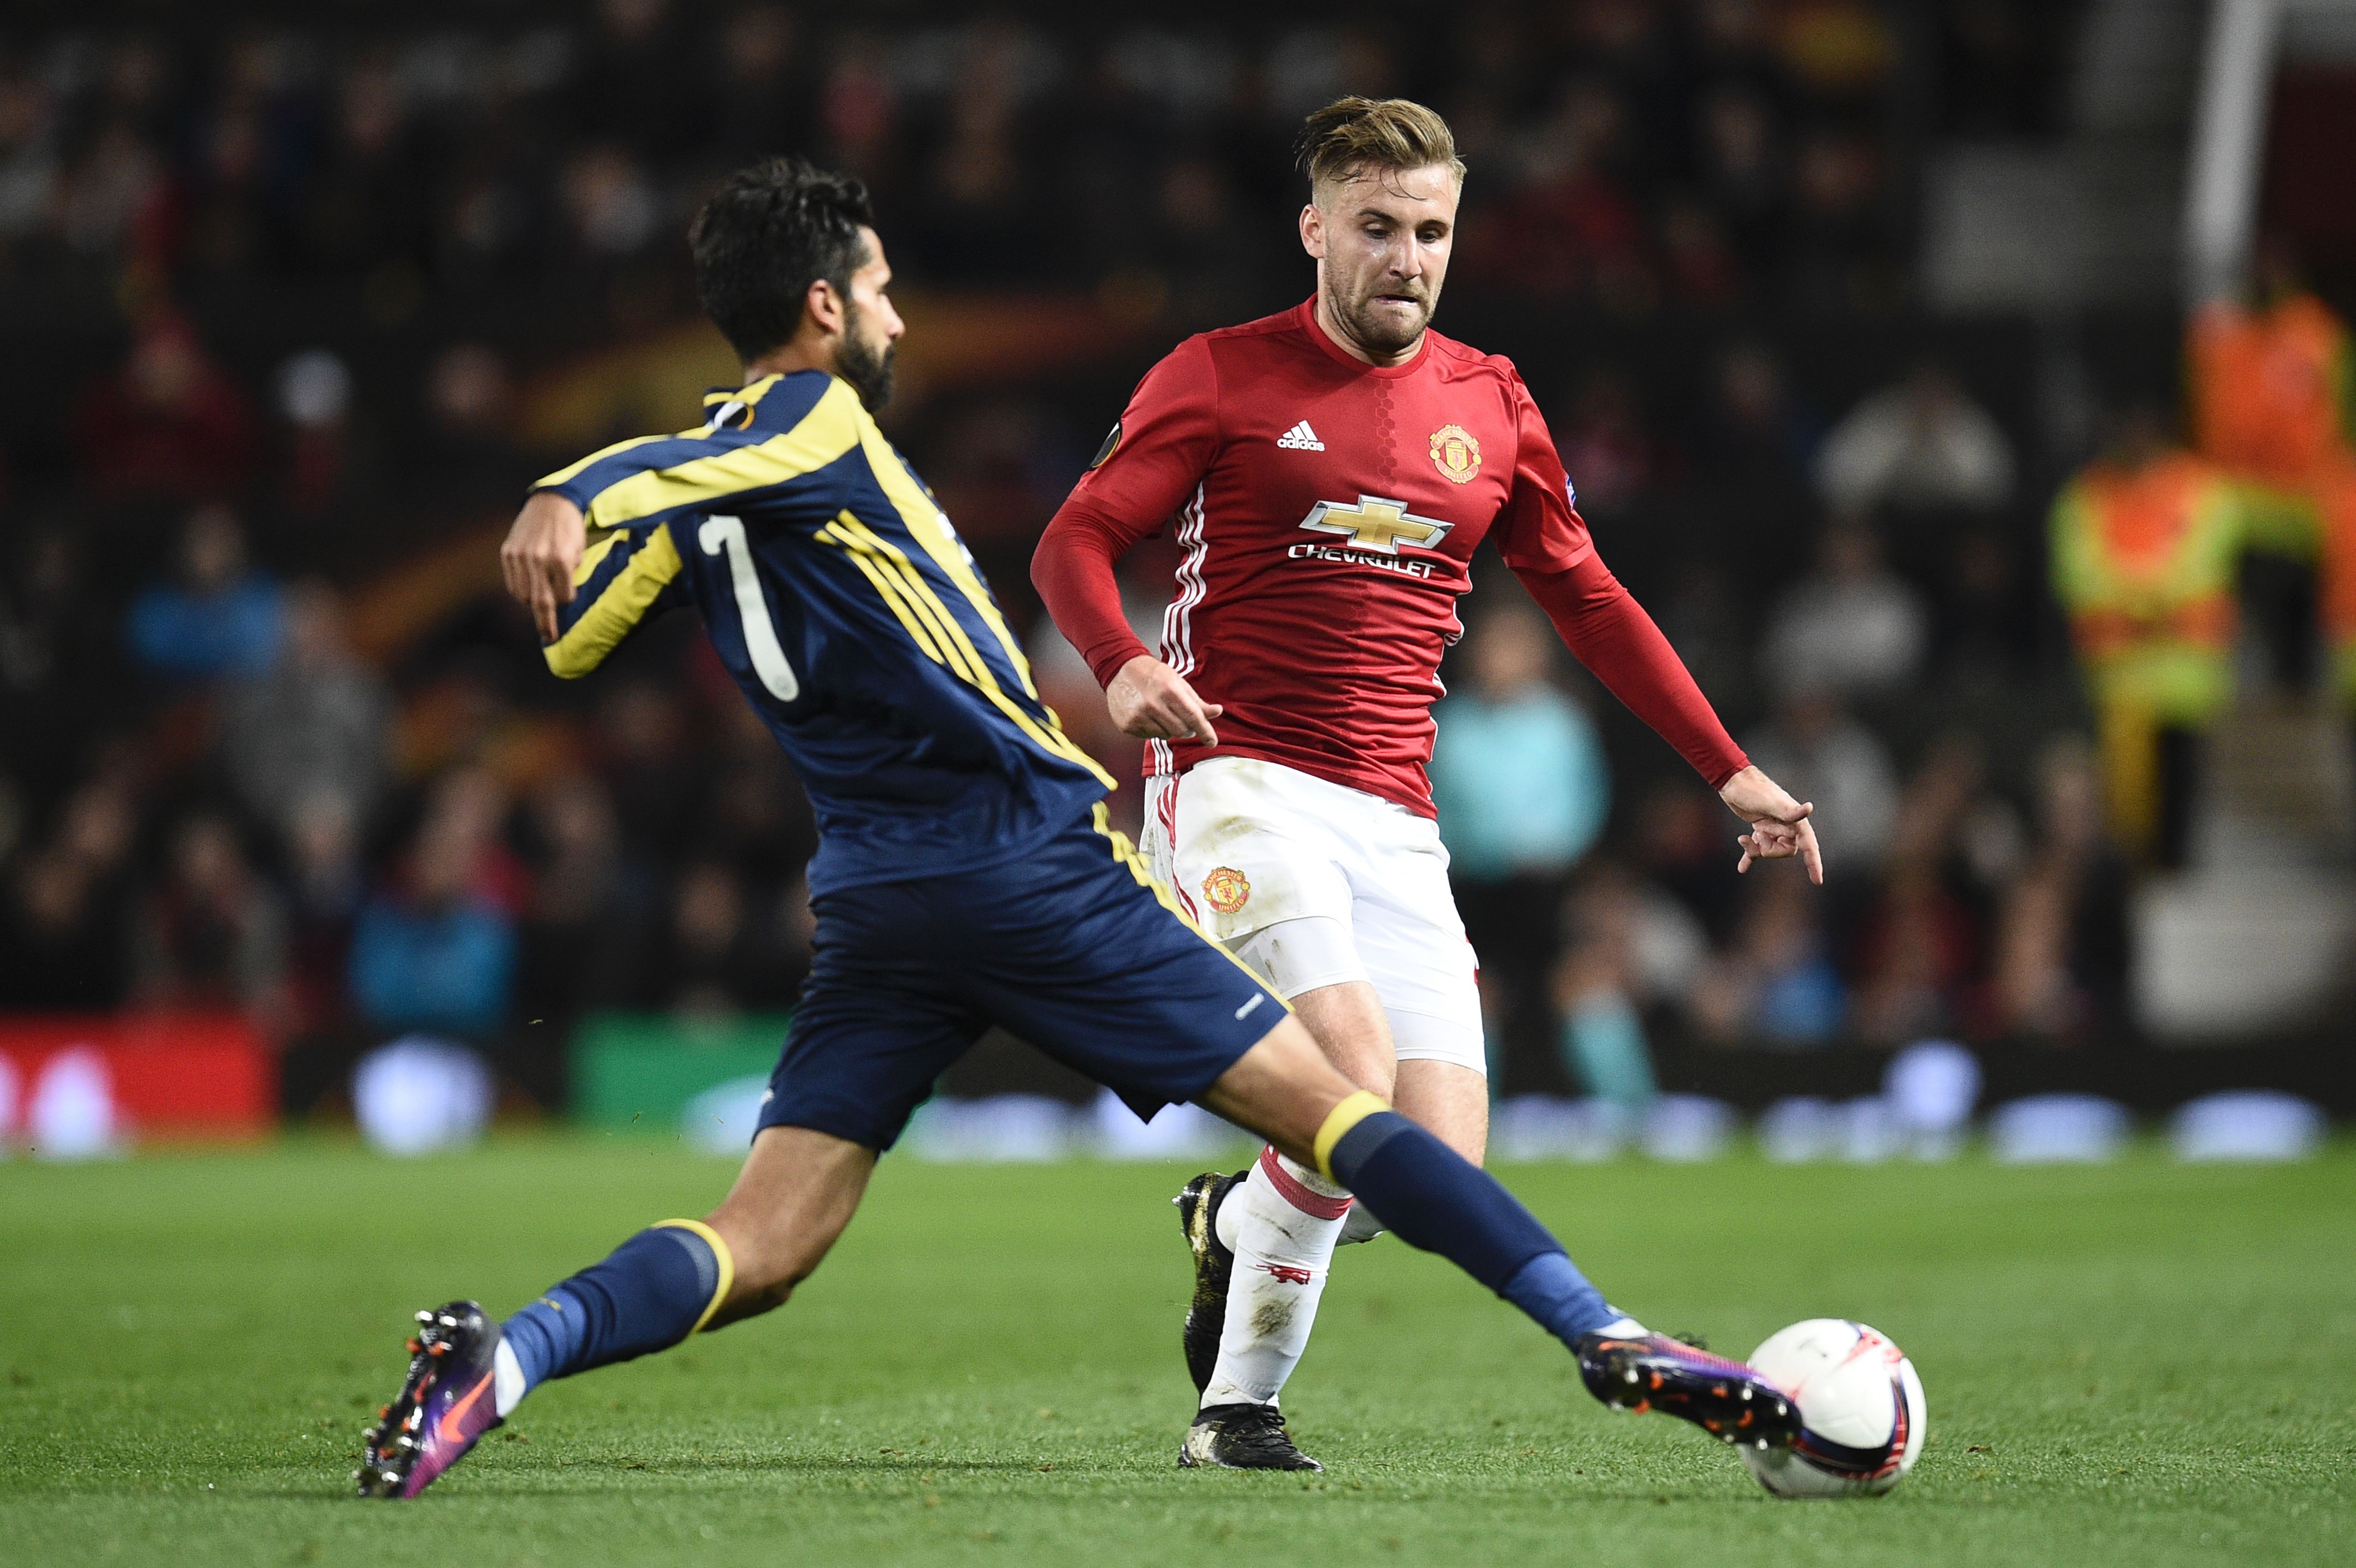 Shaw looked completely out of sorts against Fenerbahce, with the Turks dictating play down his left wing.(Photo by Oli Scarff/AFP/Getty Images)